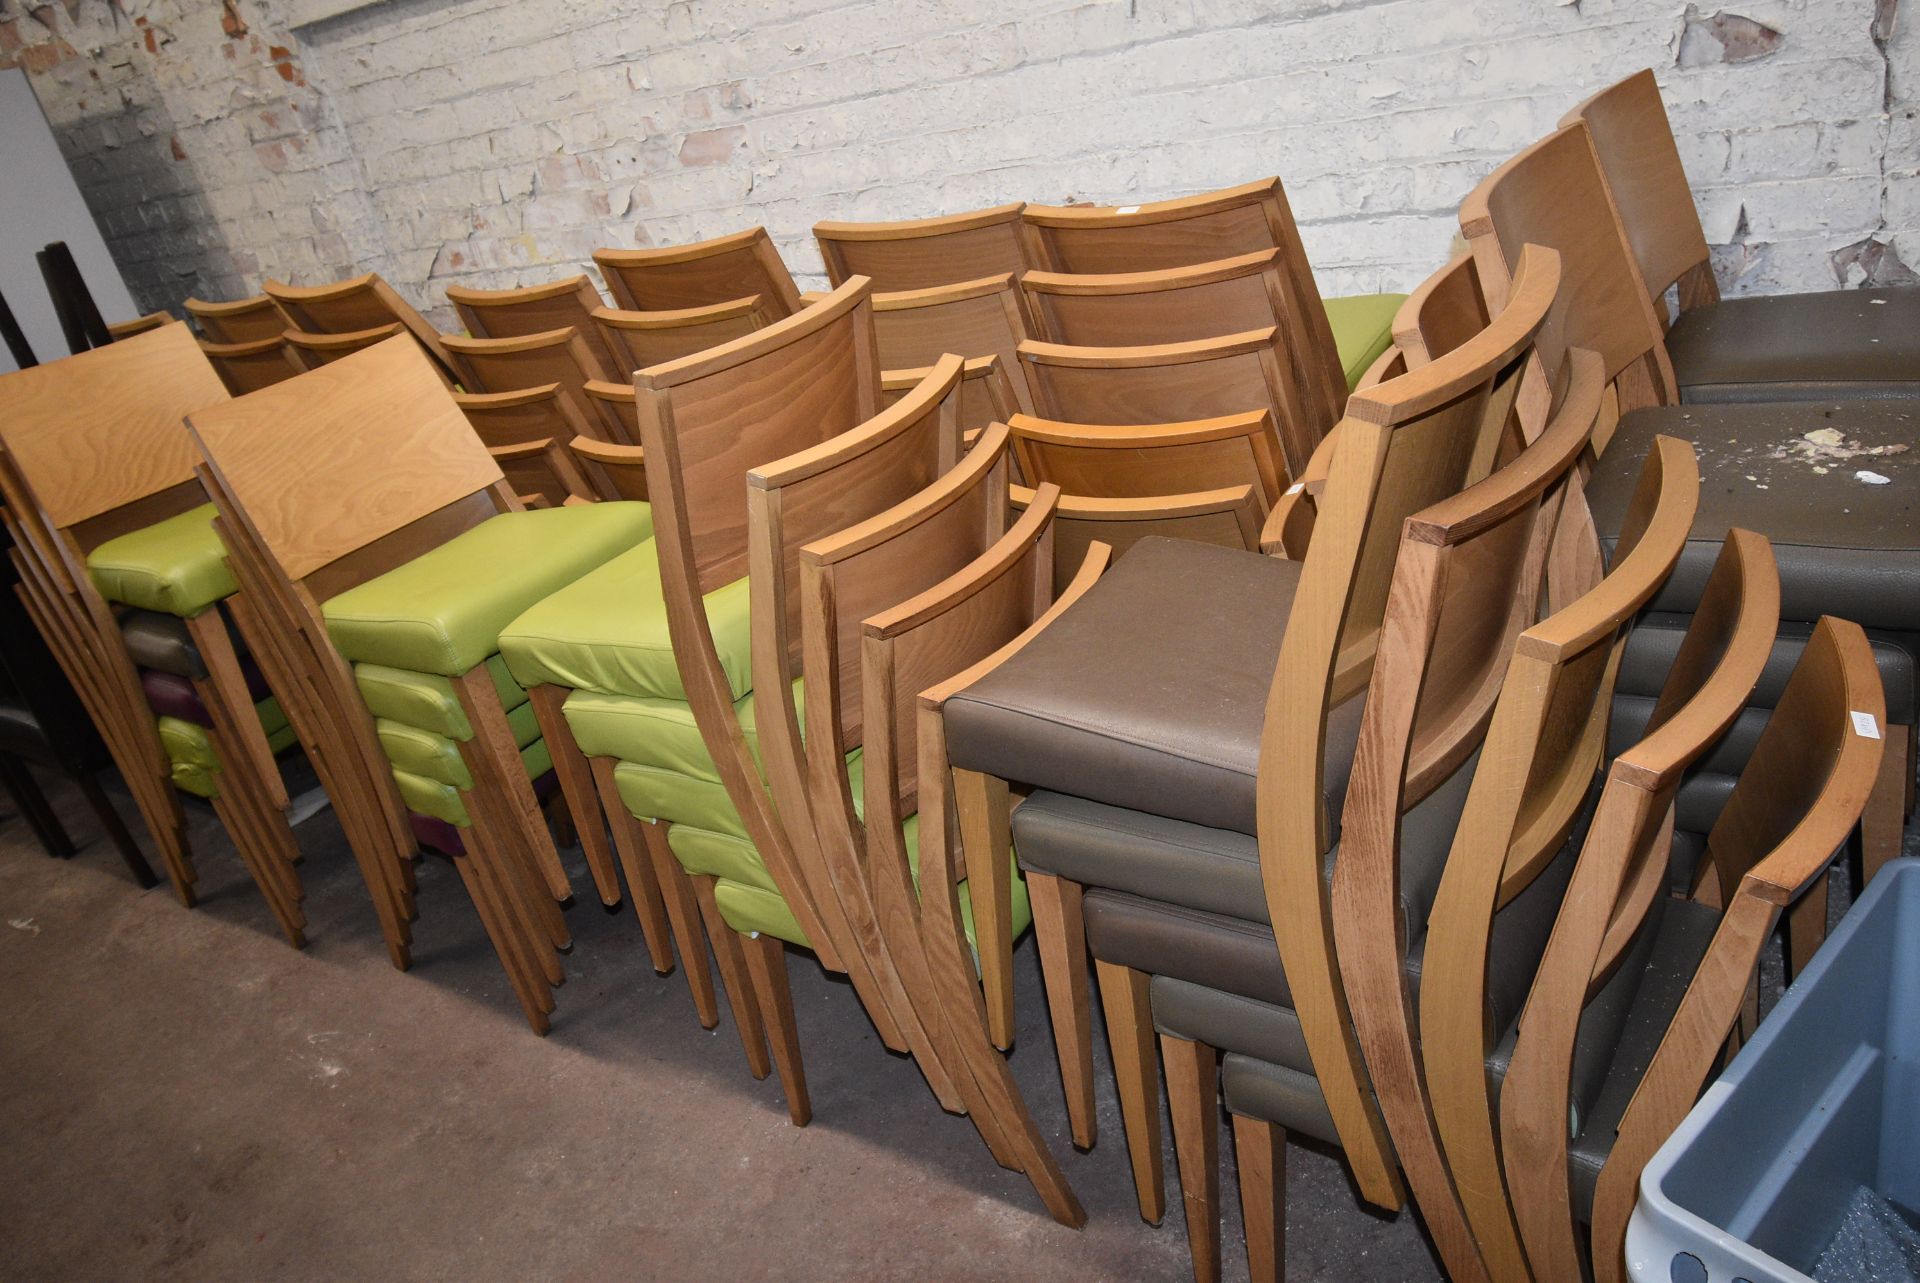 Five Wooden Framed Chairs with Upholstered Seats (assorted colours, first come first serve) - Image 2 of 2